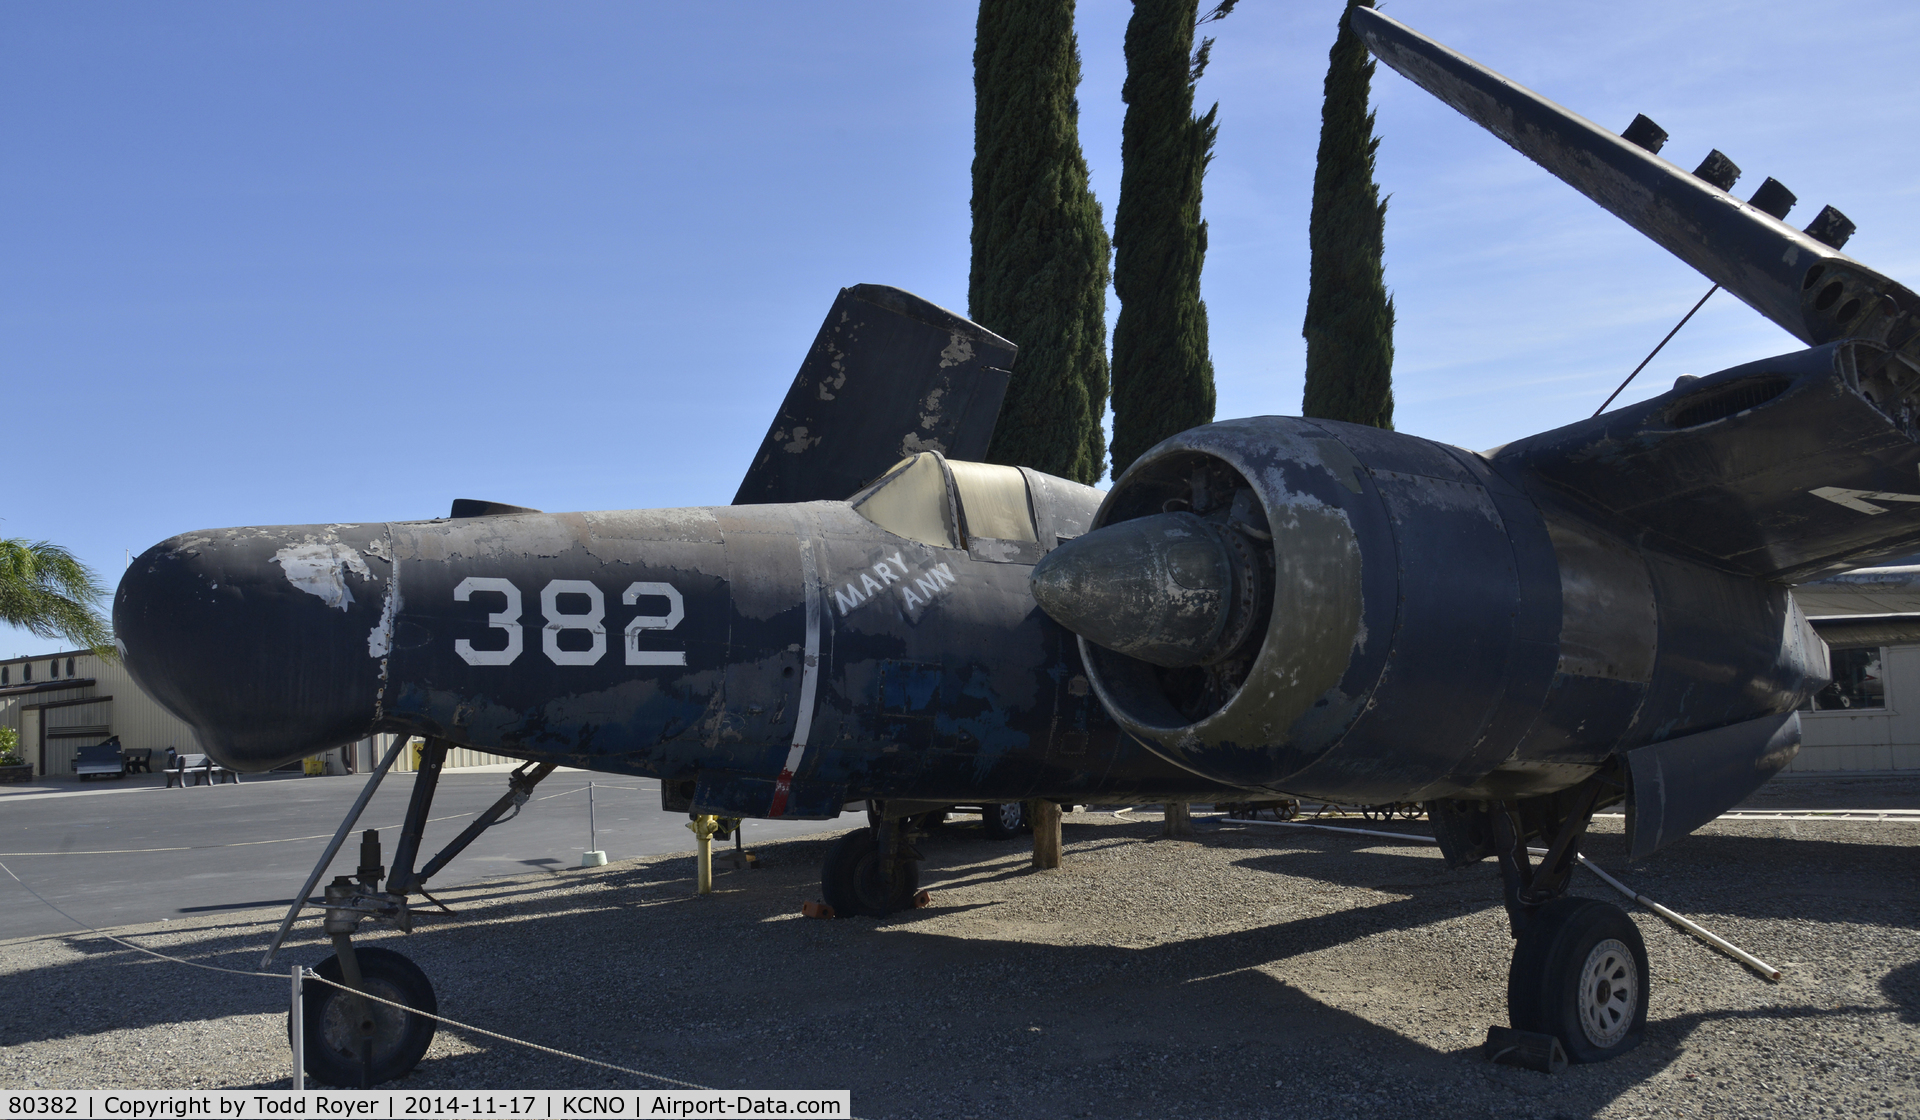 80382, Grumman F7F-3N Tigercat C/N C.124, On display at the Planes of Fame Chino location